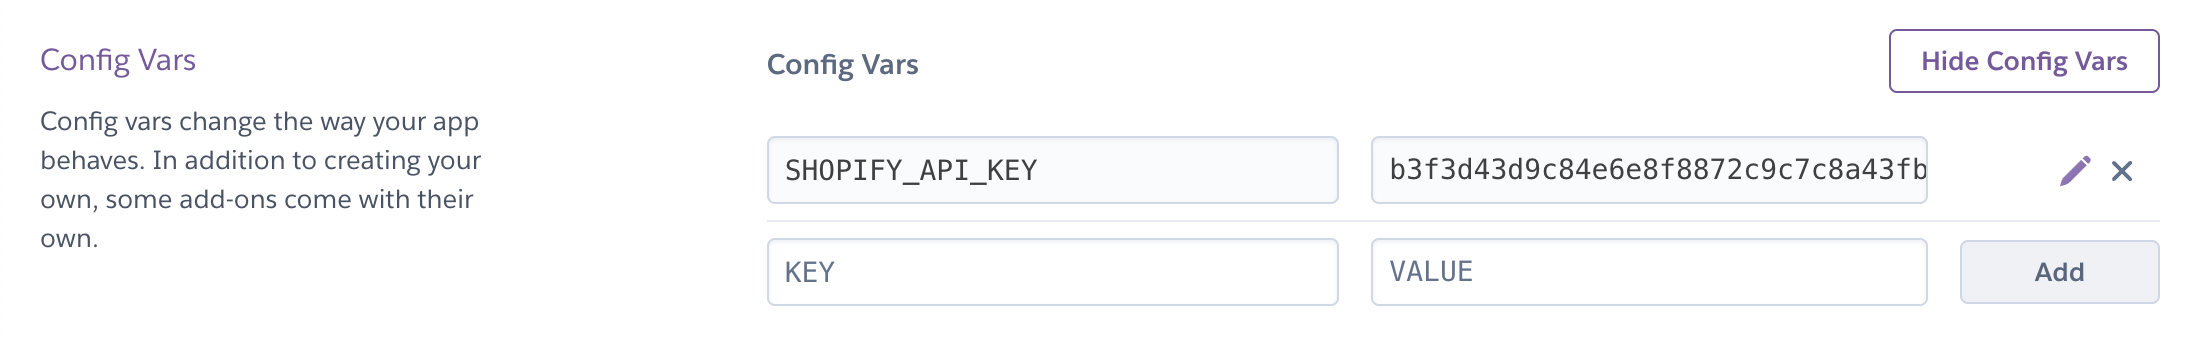 Example of the SHOPIFY API KEY environment variable